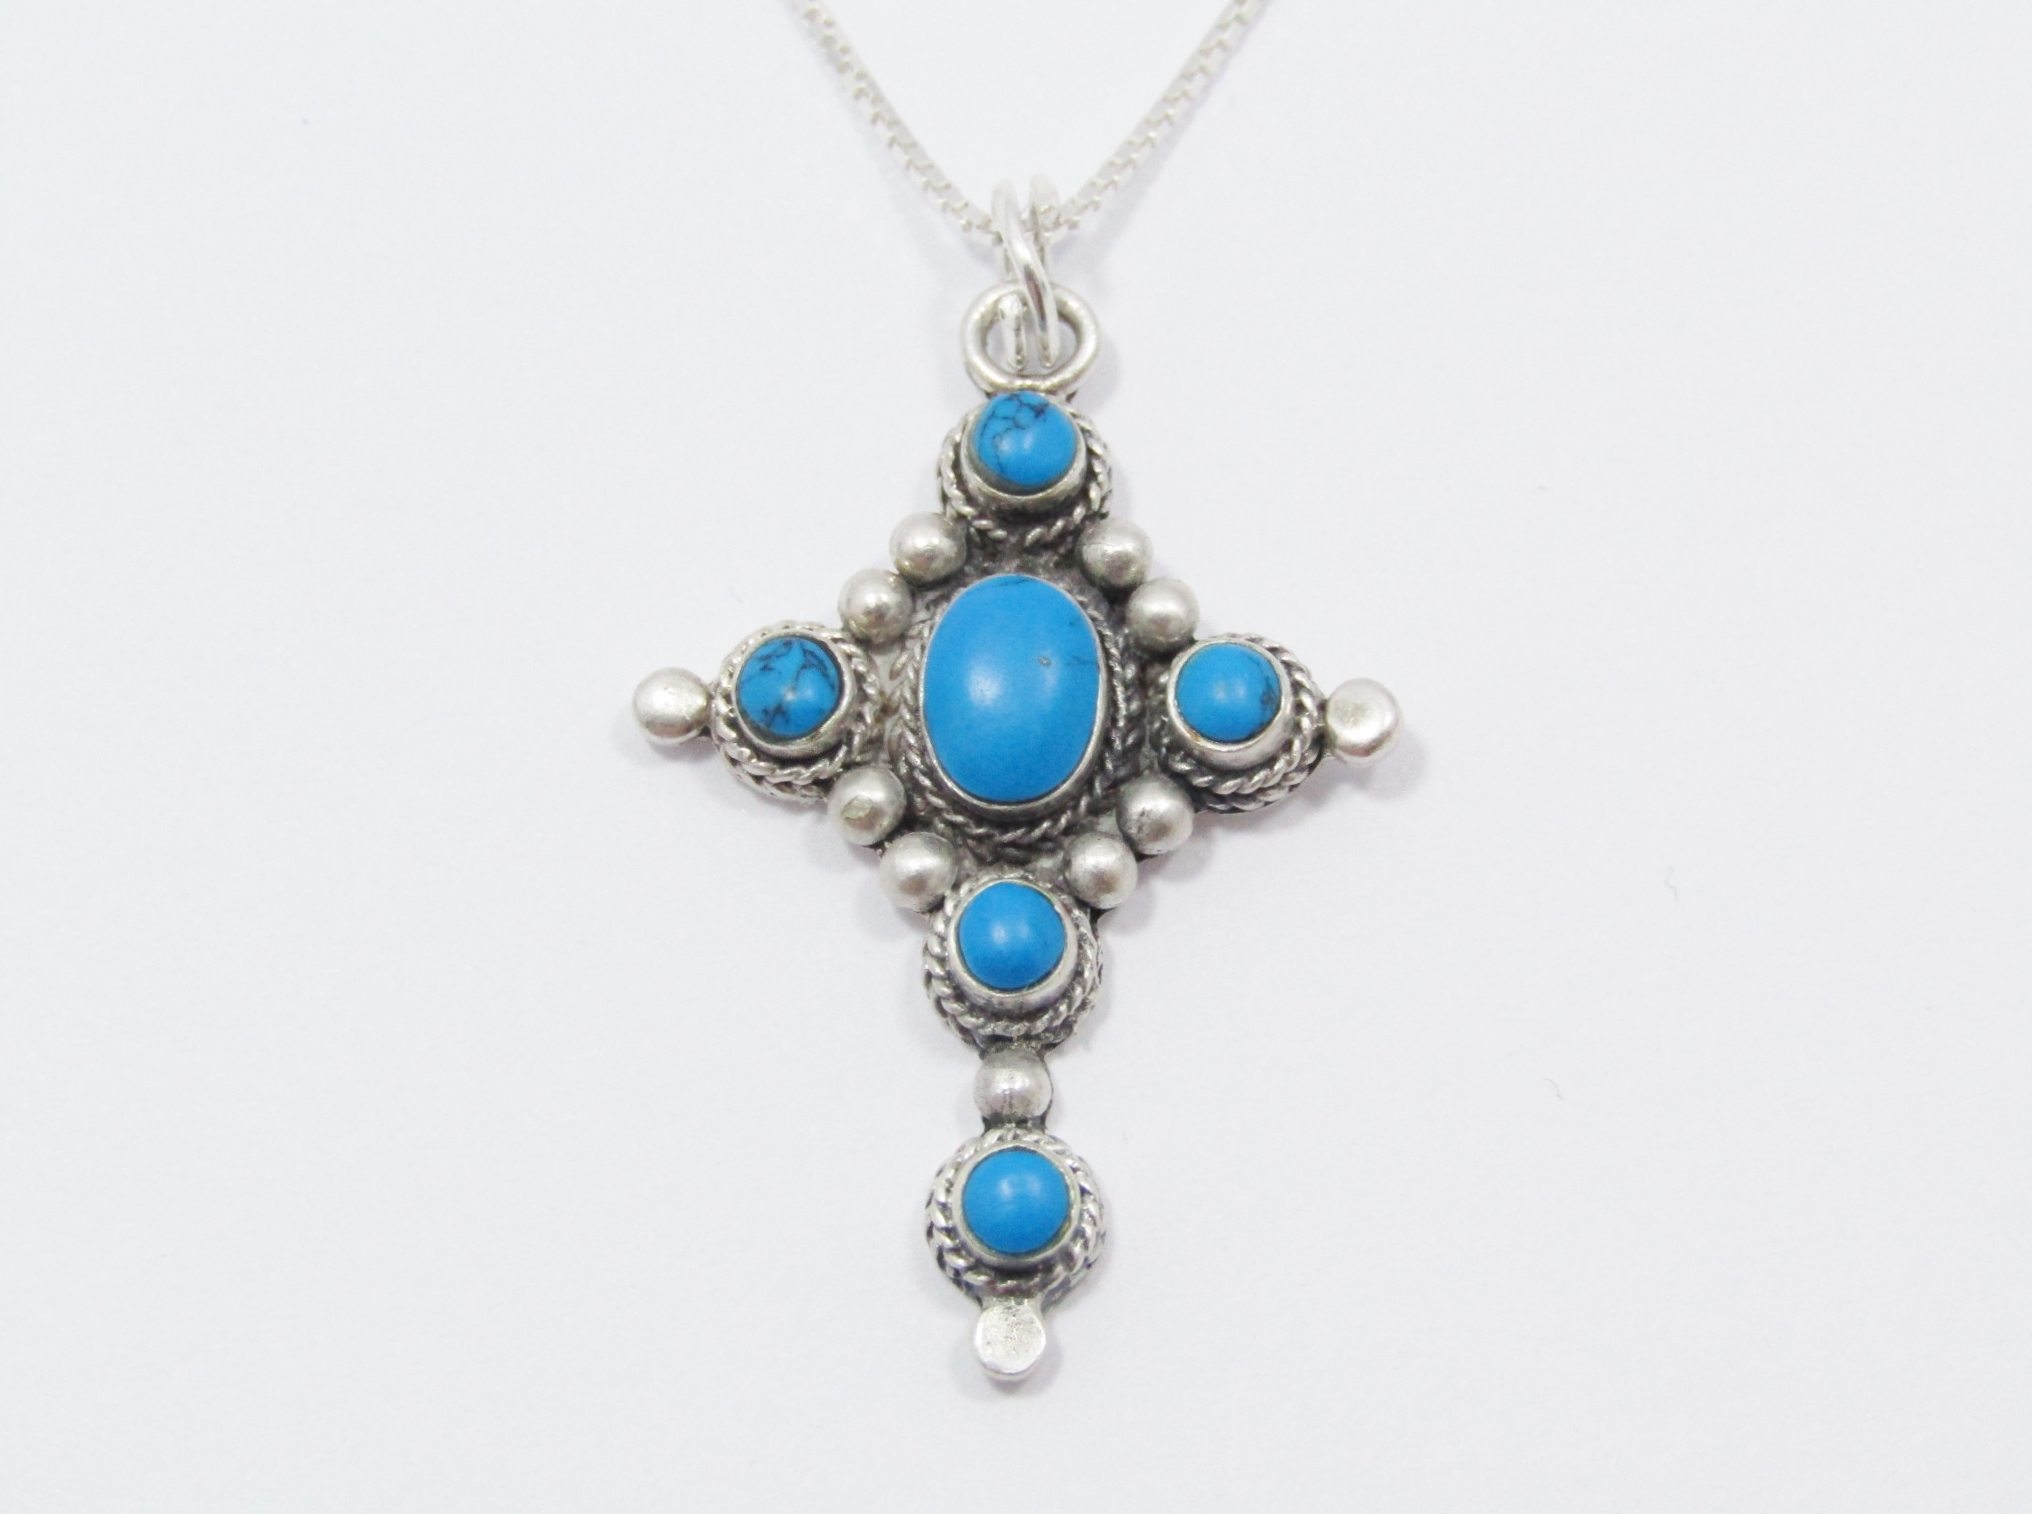 A Lovely Blue Stone Cross Pendant On Chain in Sterling Silver.